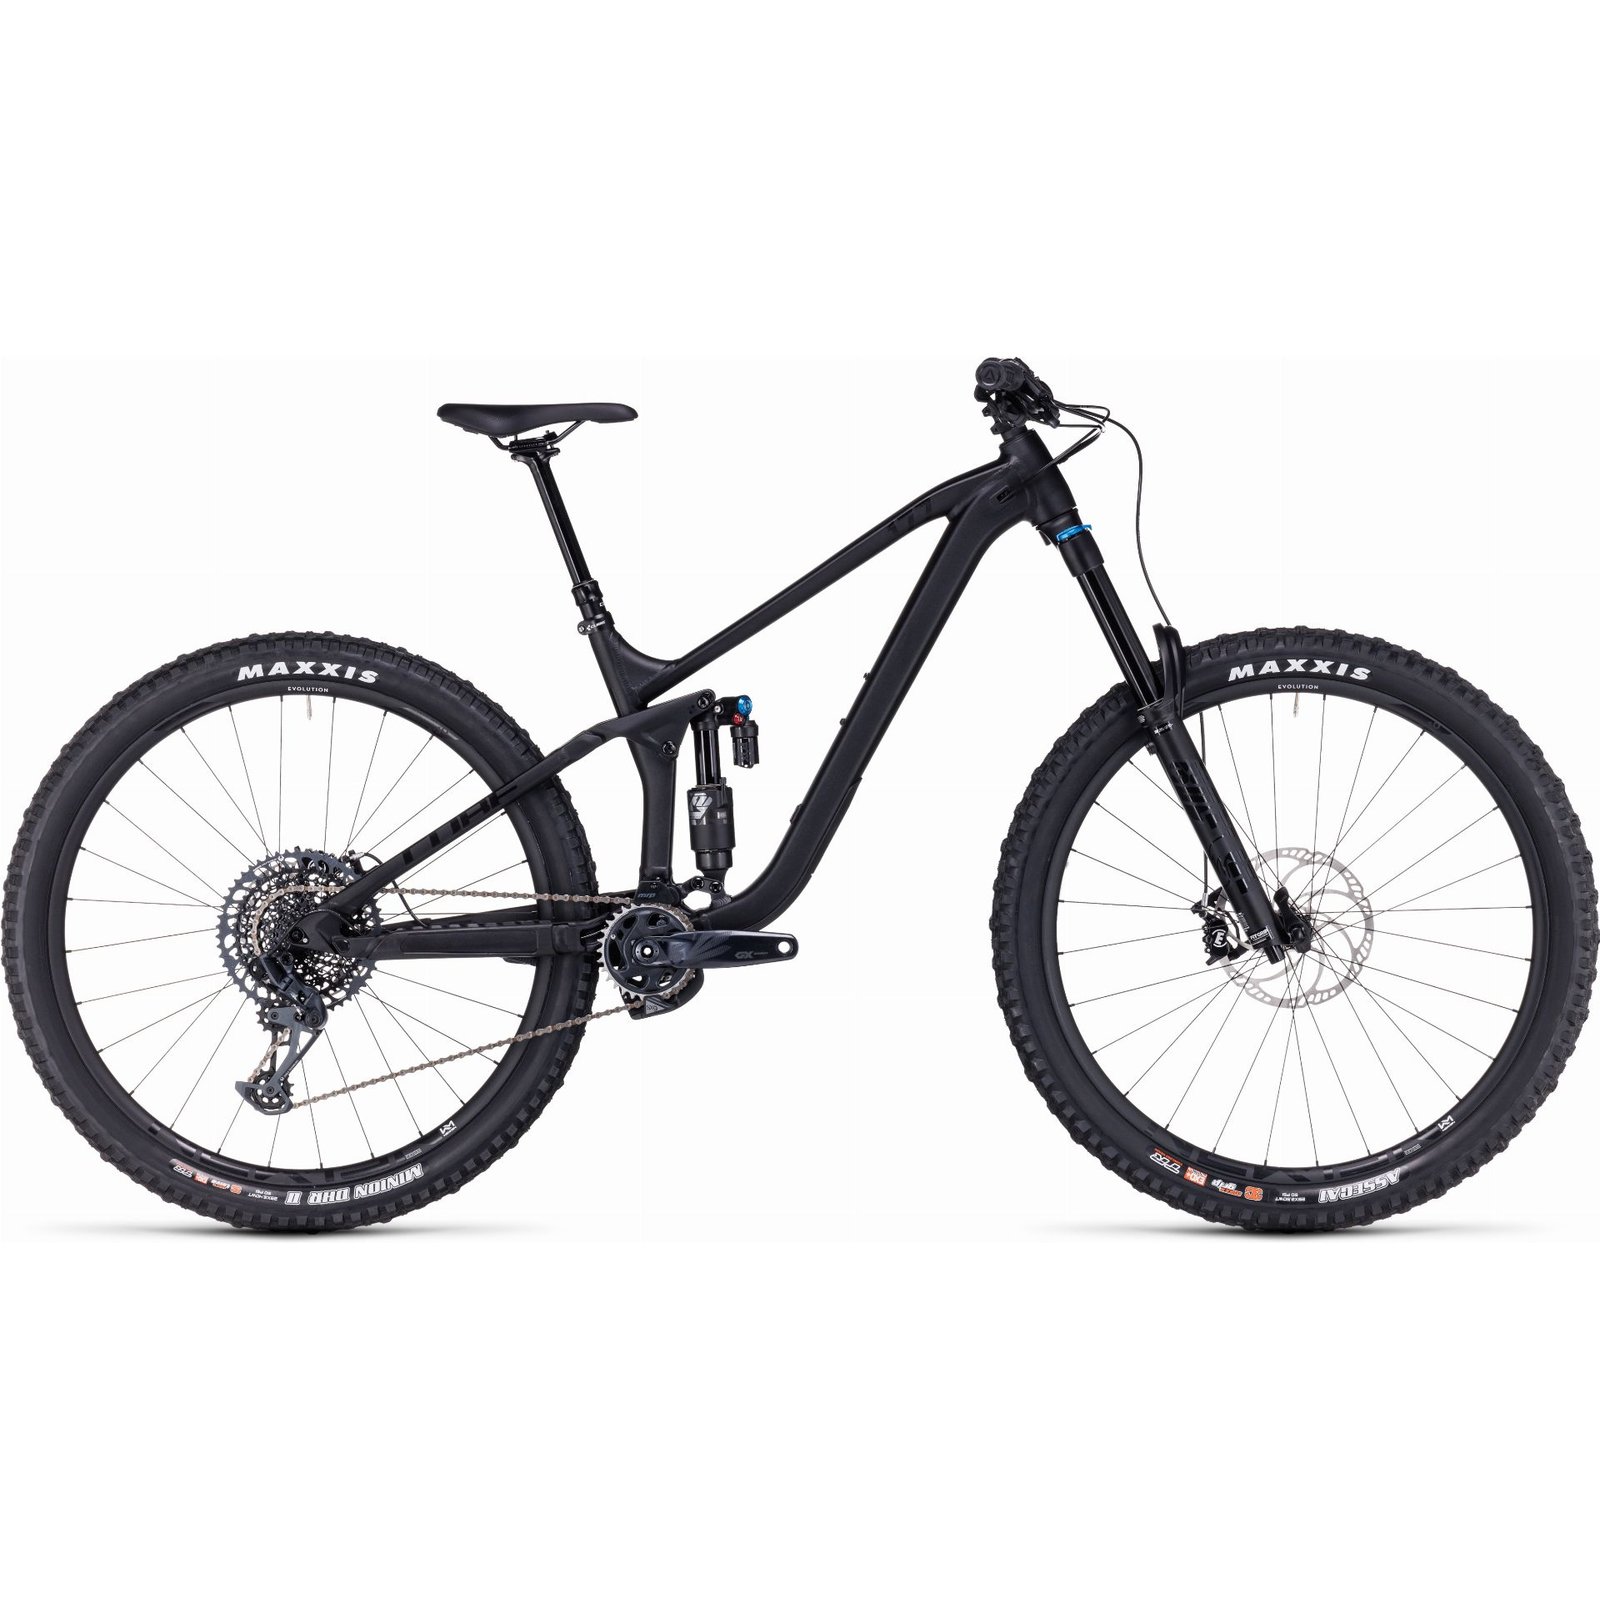 Cube Stereo One77 Pro MTB-Fully 29 black anodized